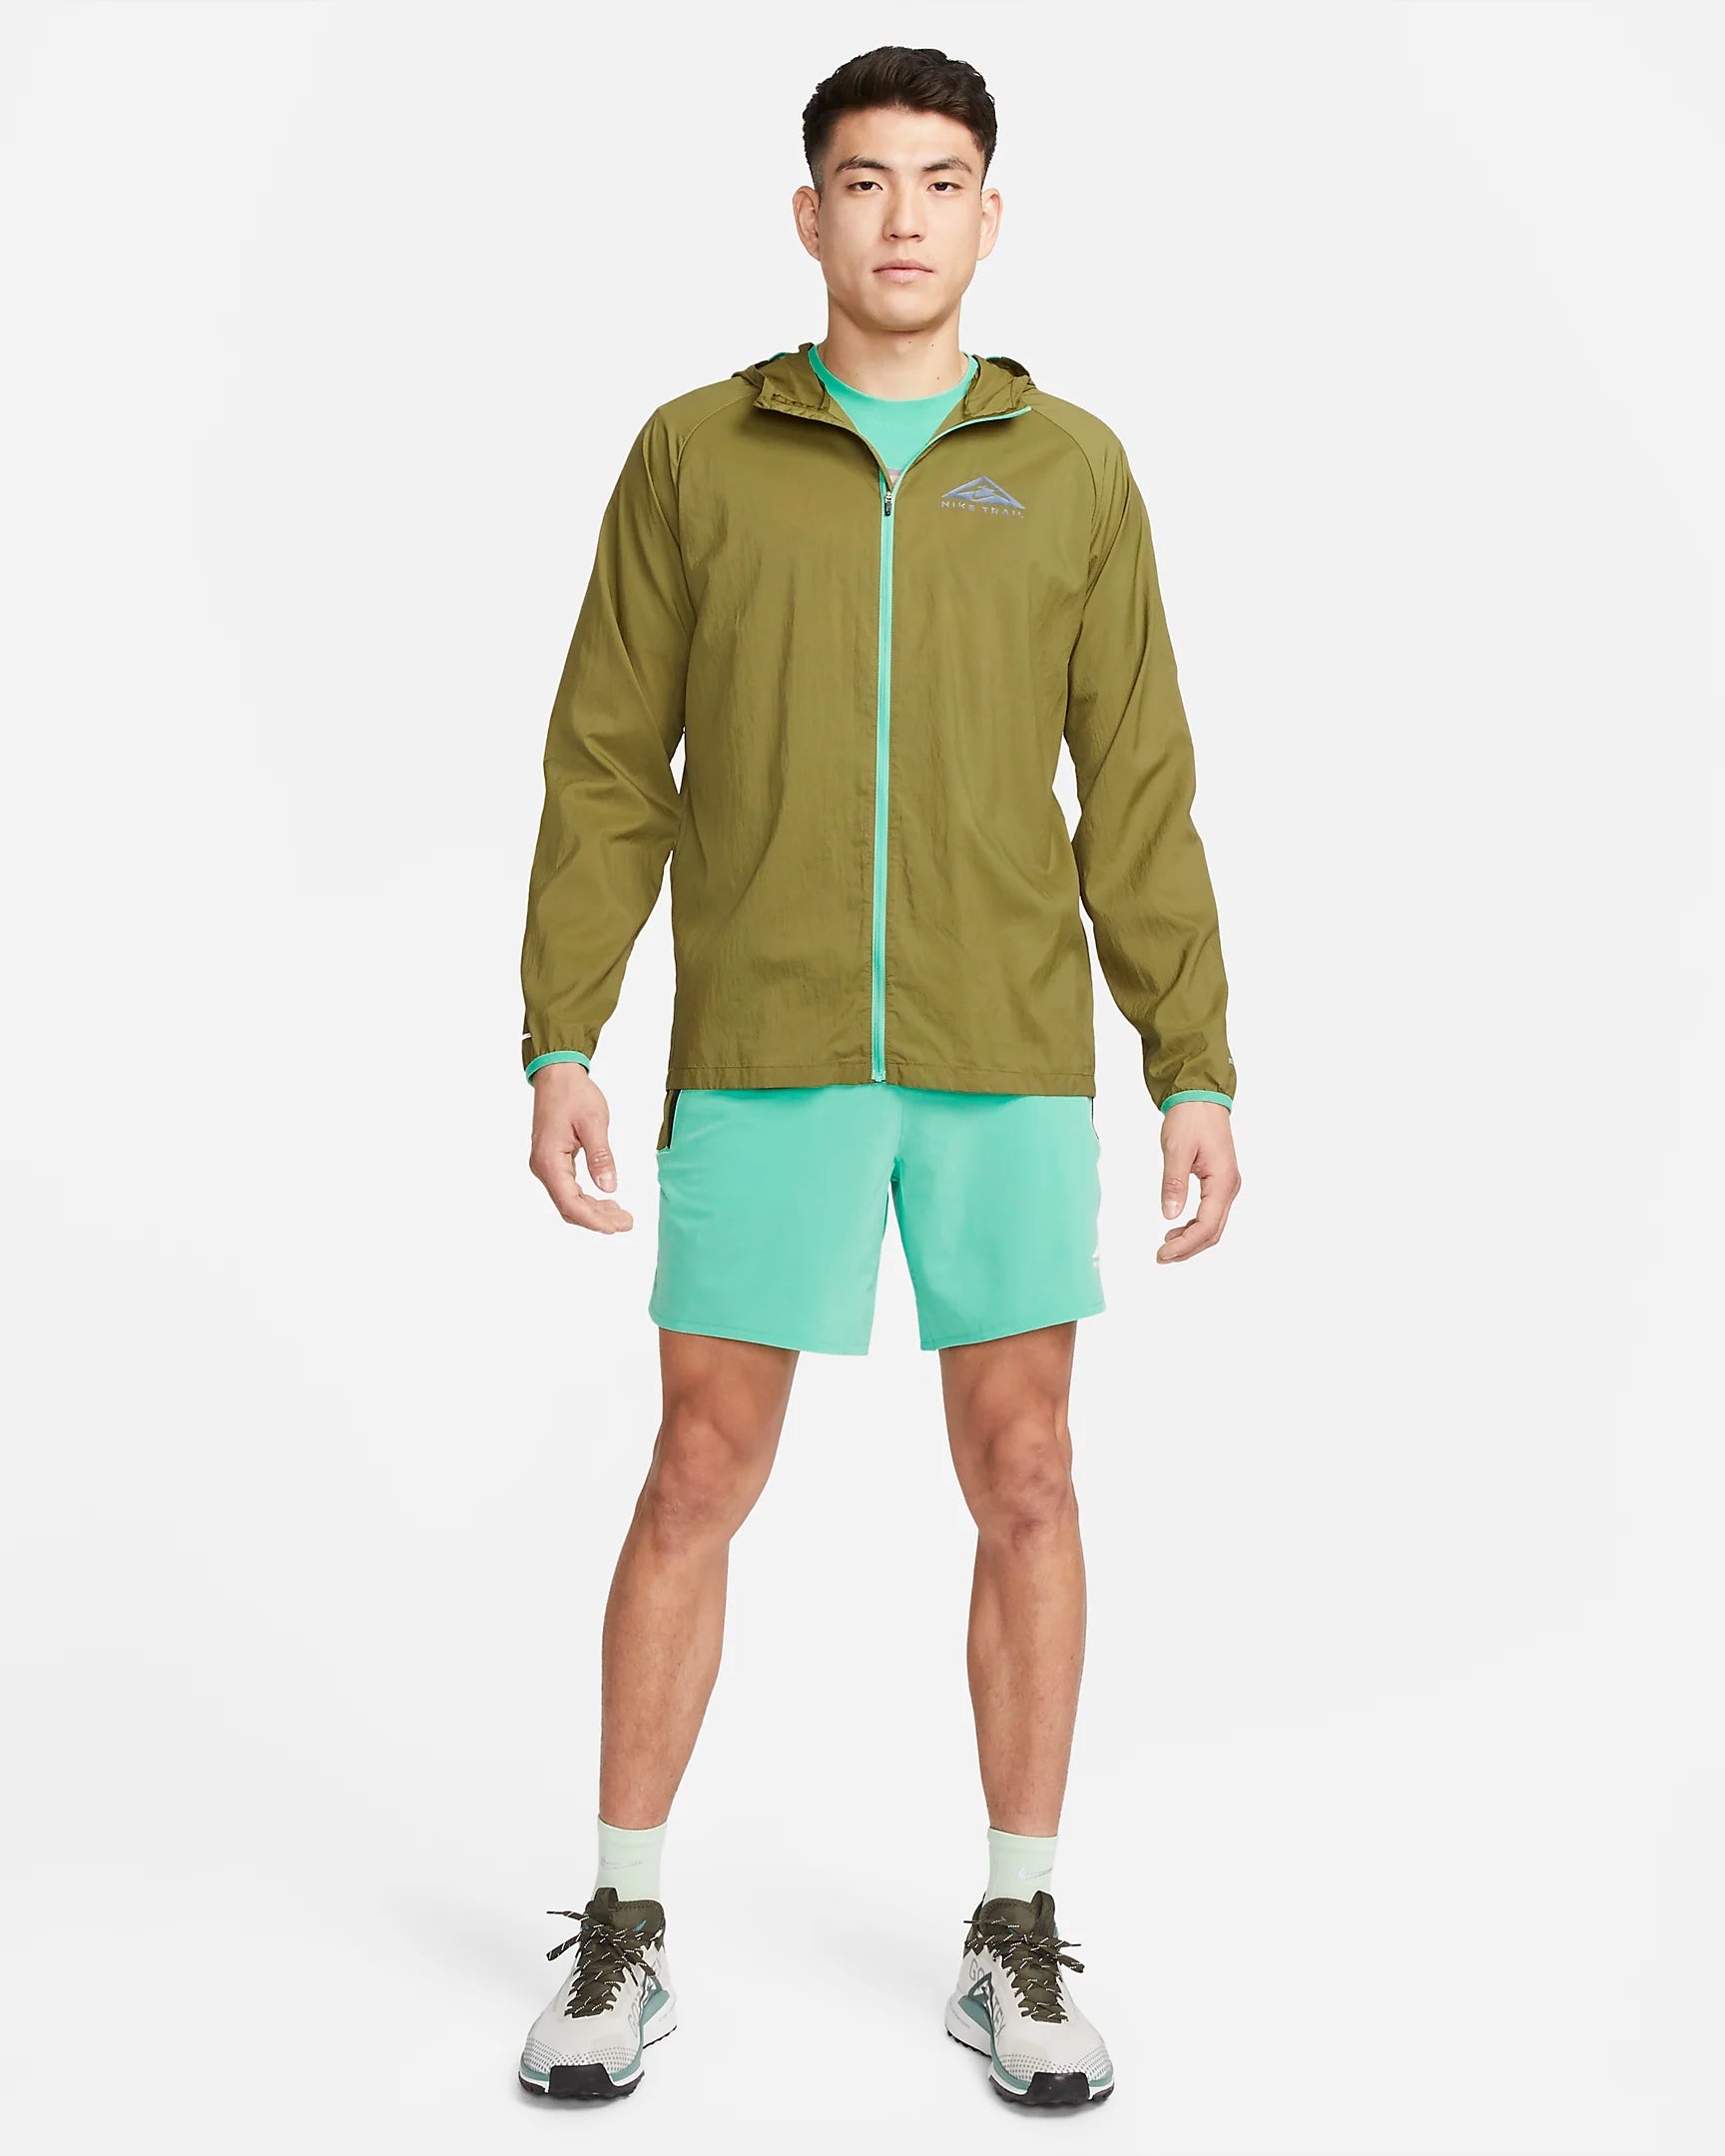 Mens Nike Aireez Jacket – The Running Company